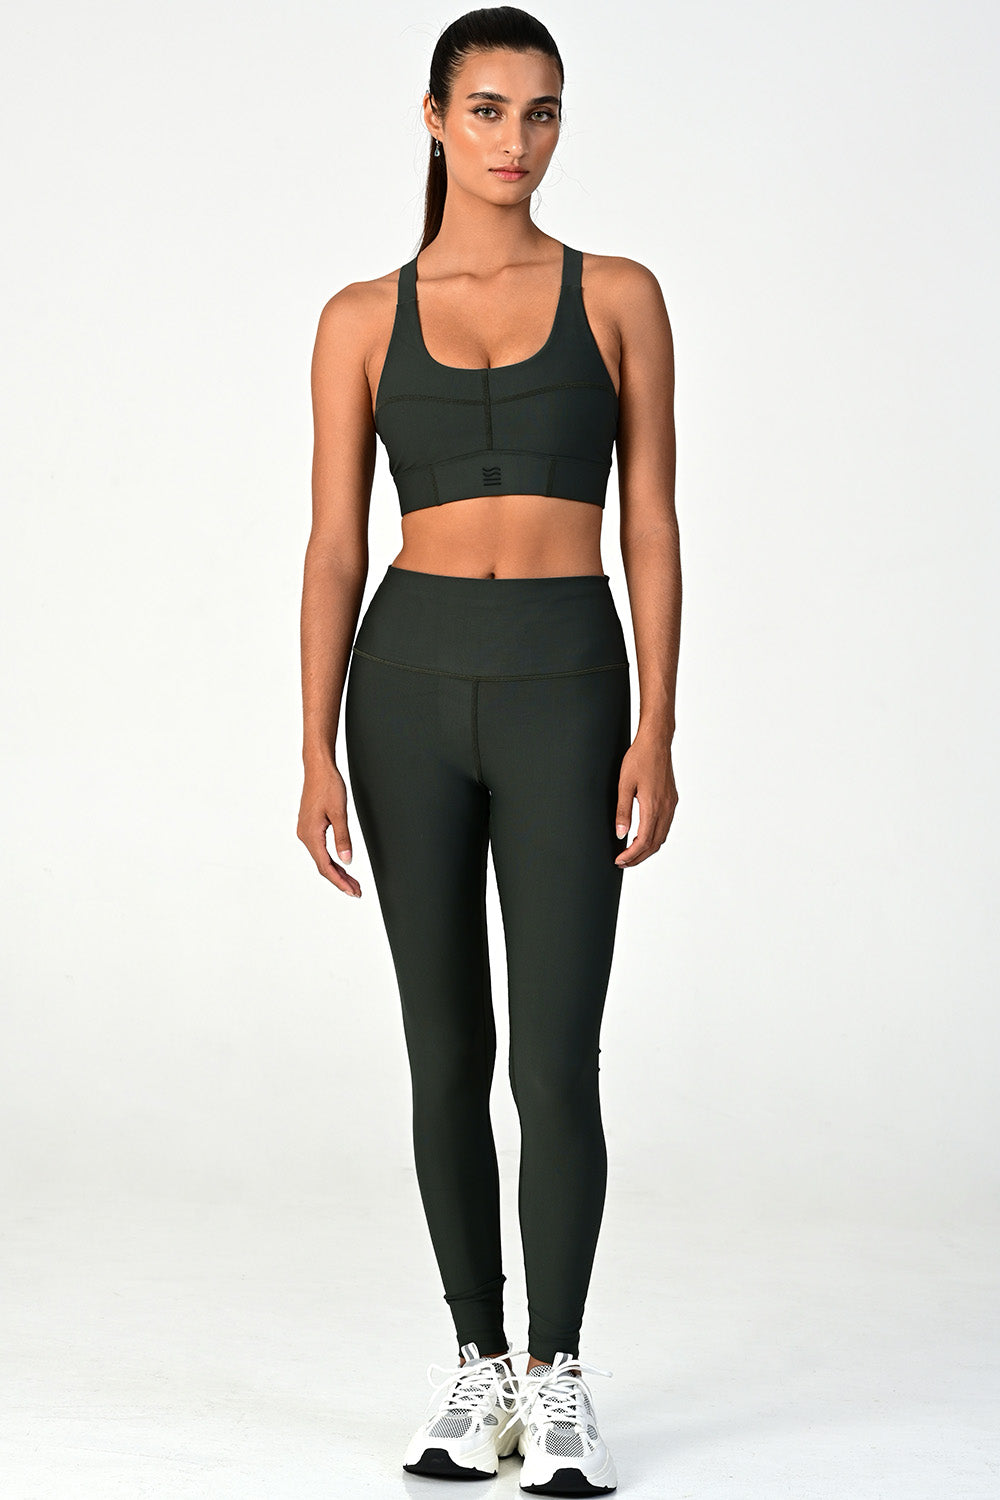 Front view of a woman wearing the Soho dark olive active legging on a white background